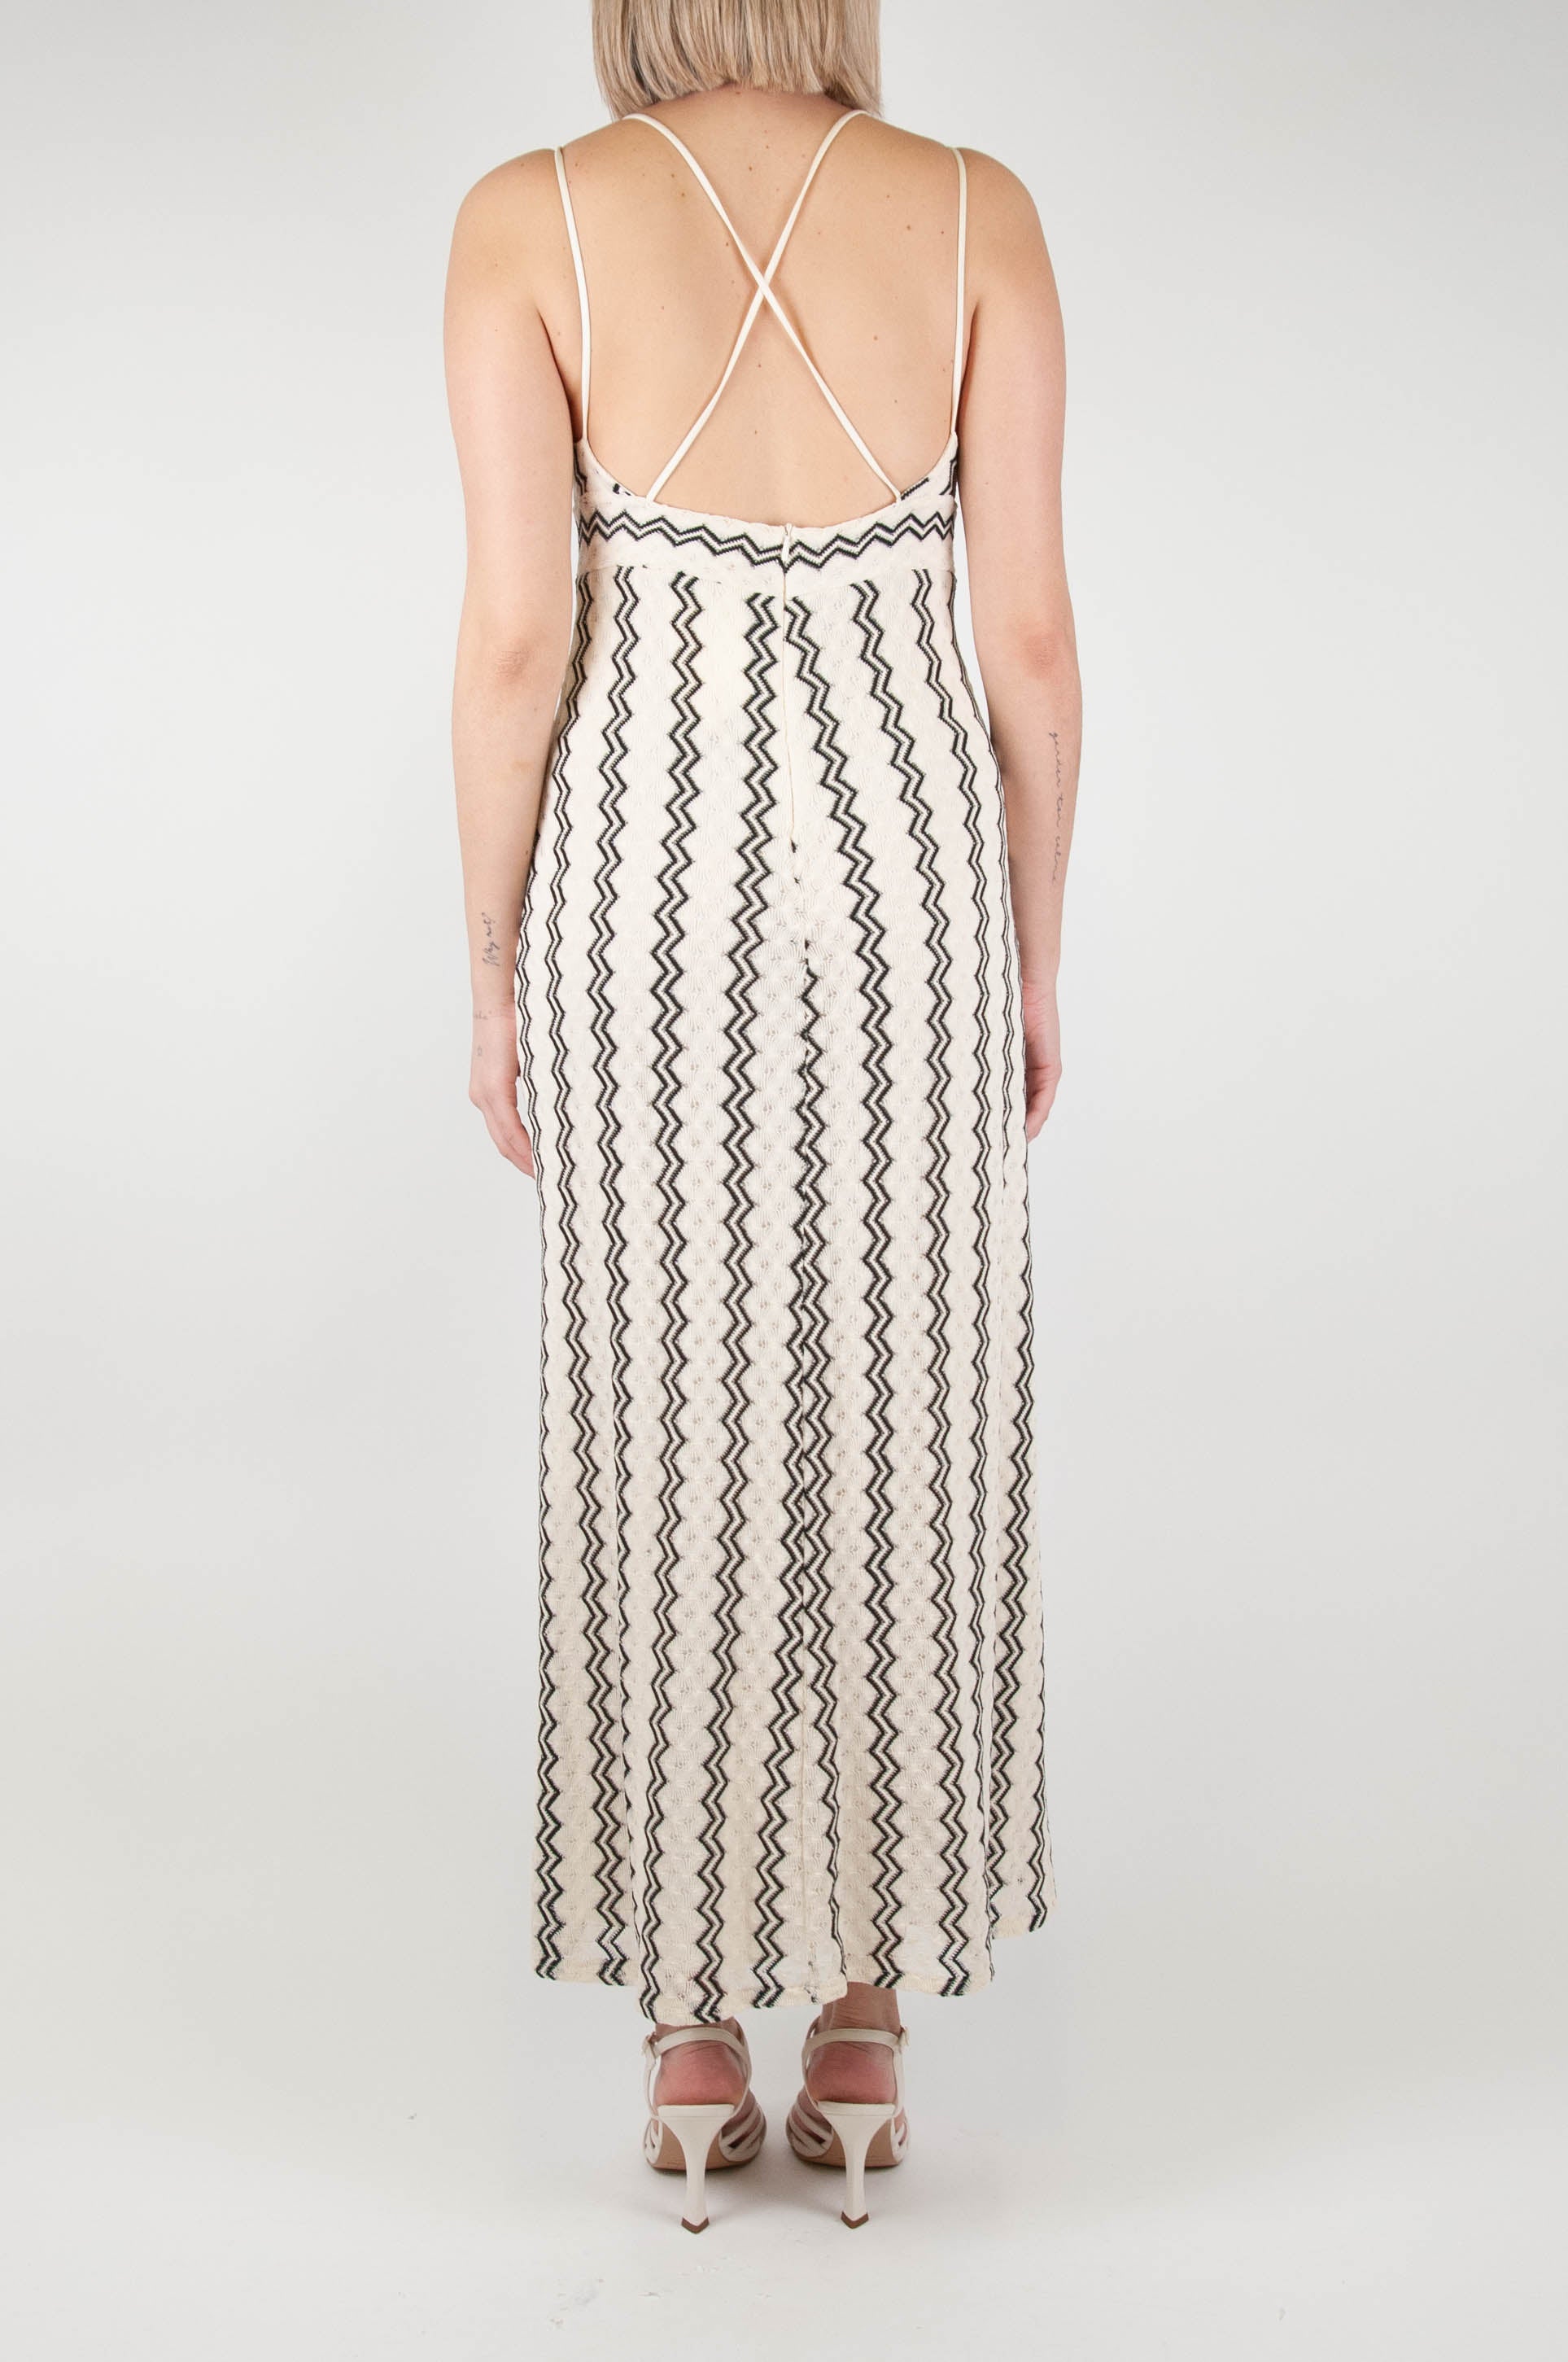 Haveone - Long zig zag patterned dress with front-back neckline